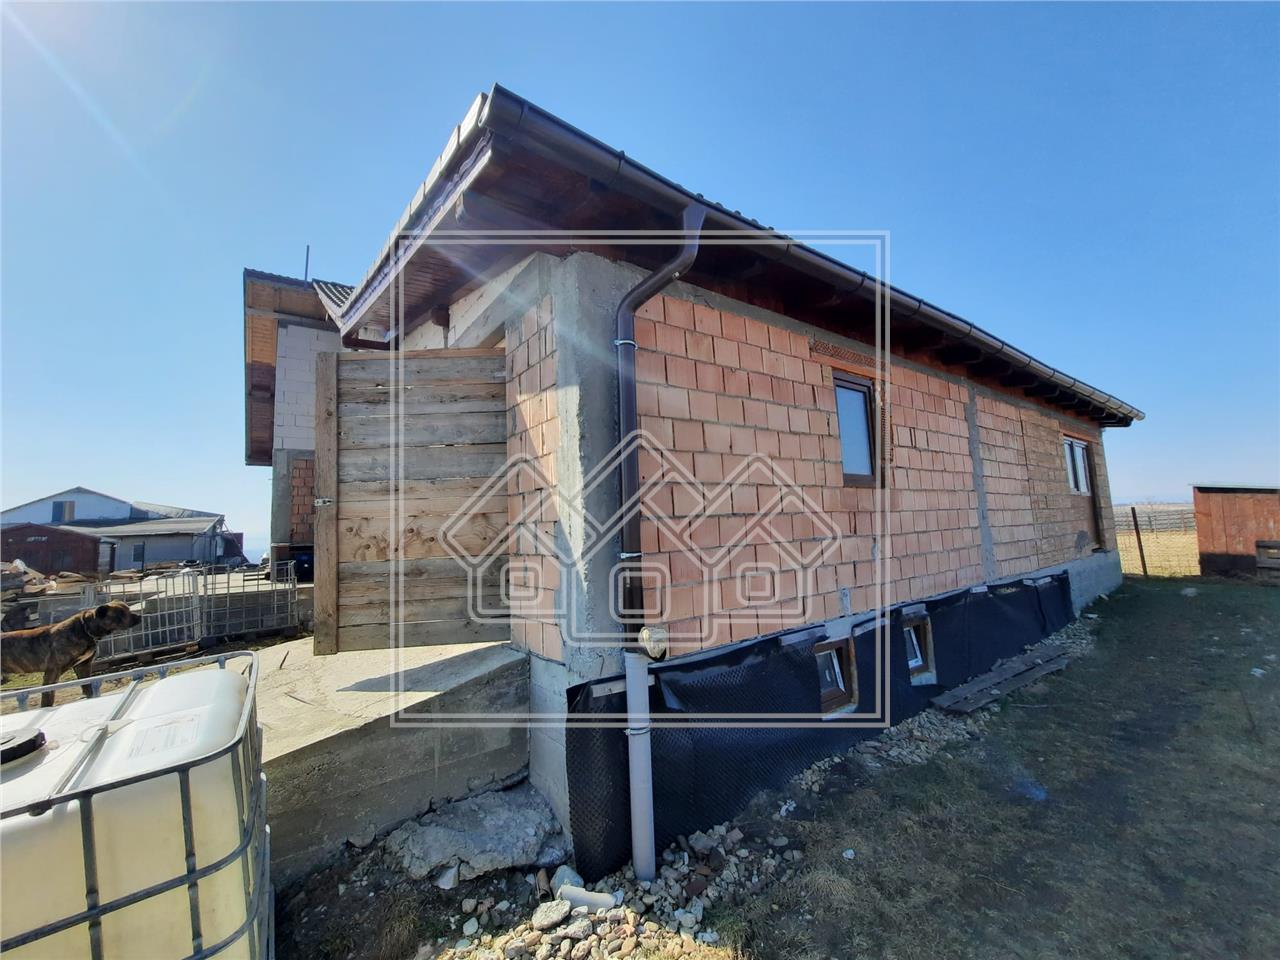 House for sale in Sibiu - 230 usable sqm + land - Sibiu Hill